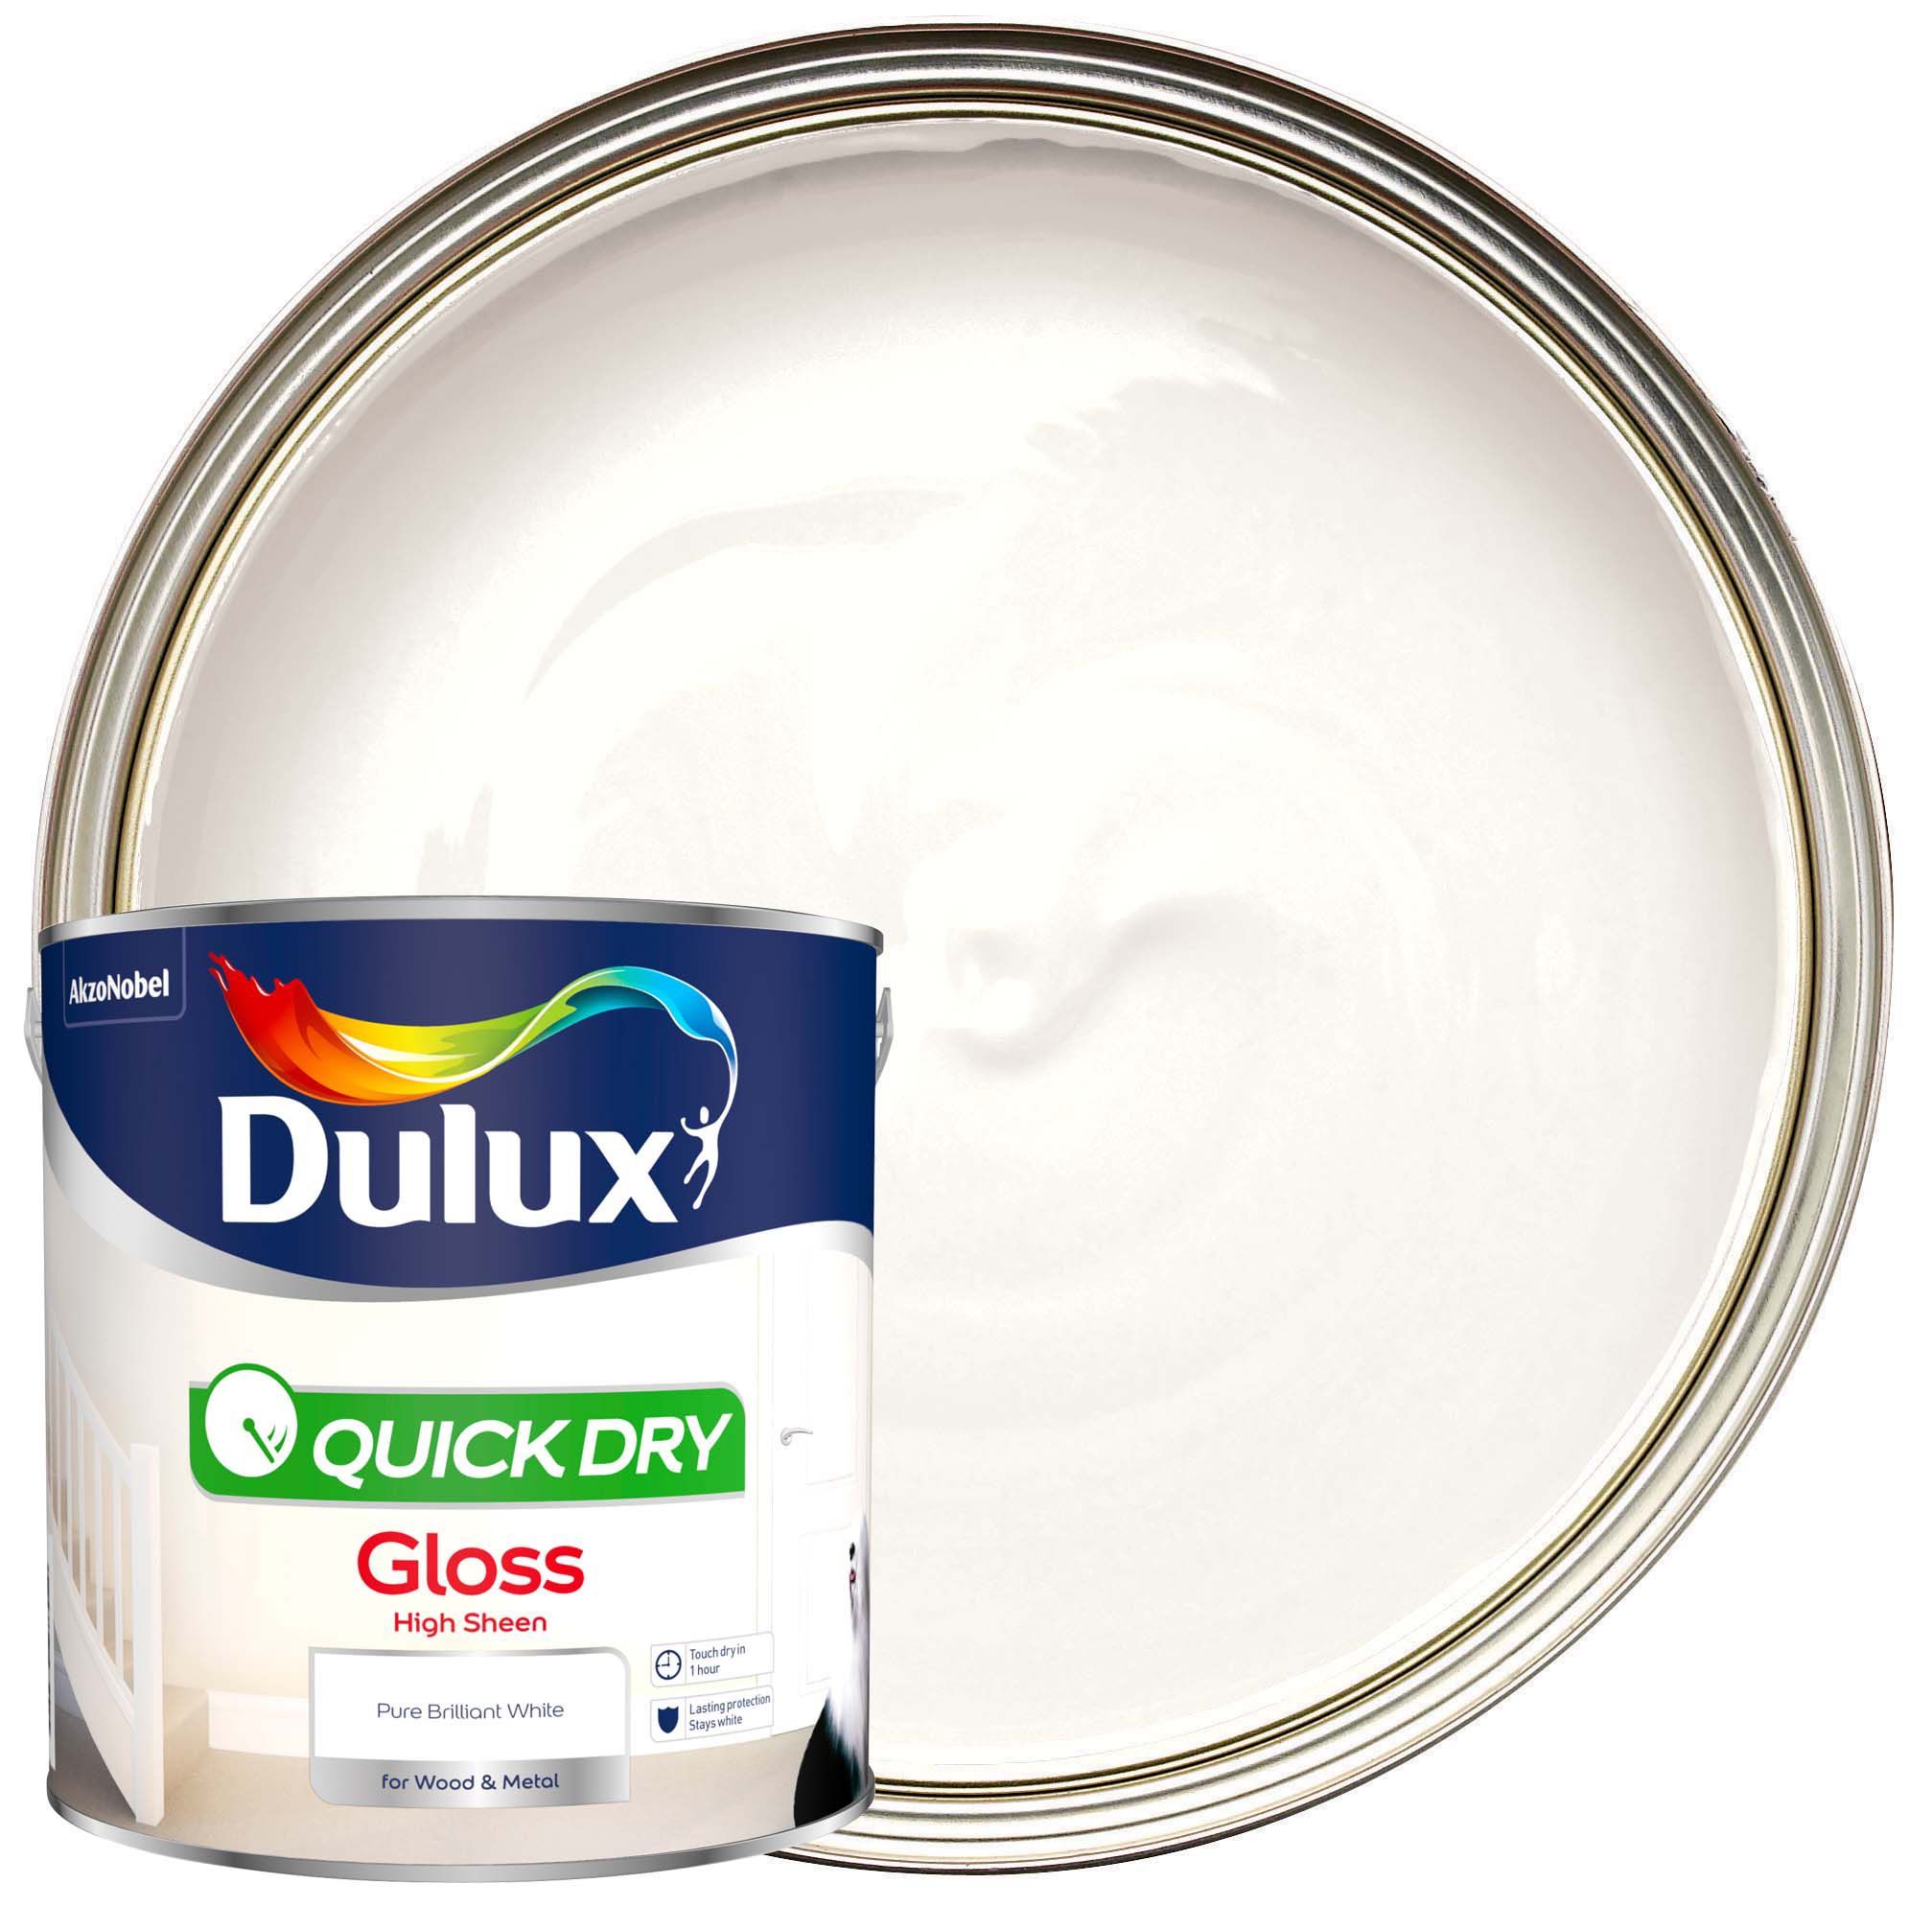 Image of Dulux Quick Dry Gloss Paint - Pure Brilliant White - 2.5L